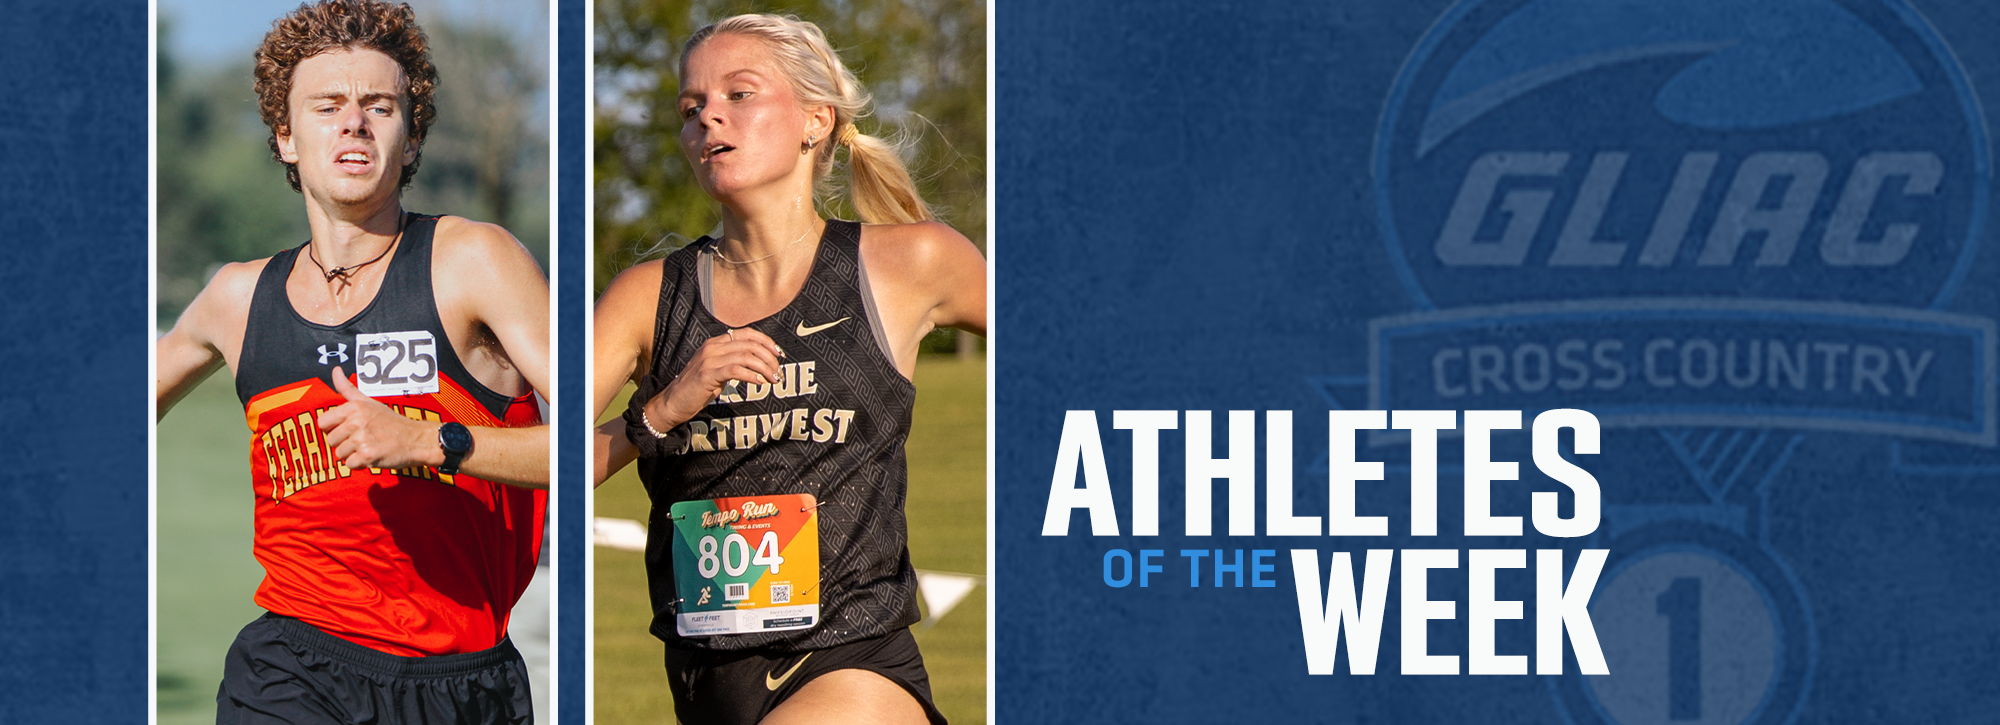 FSU's Wirth and PNW's Shaginaw named GLIAC Cross Country Athletes of the Week